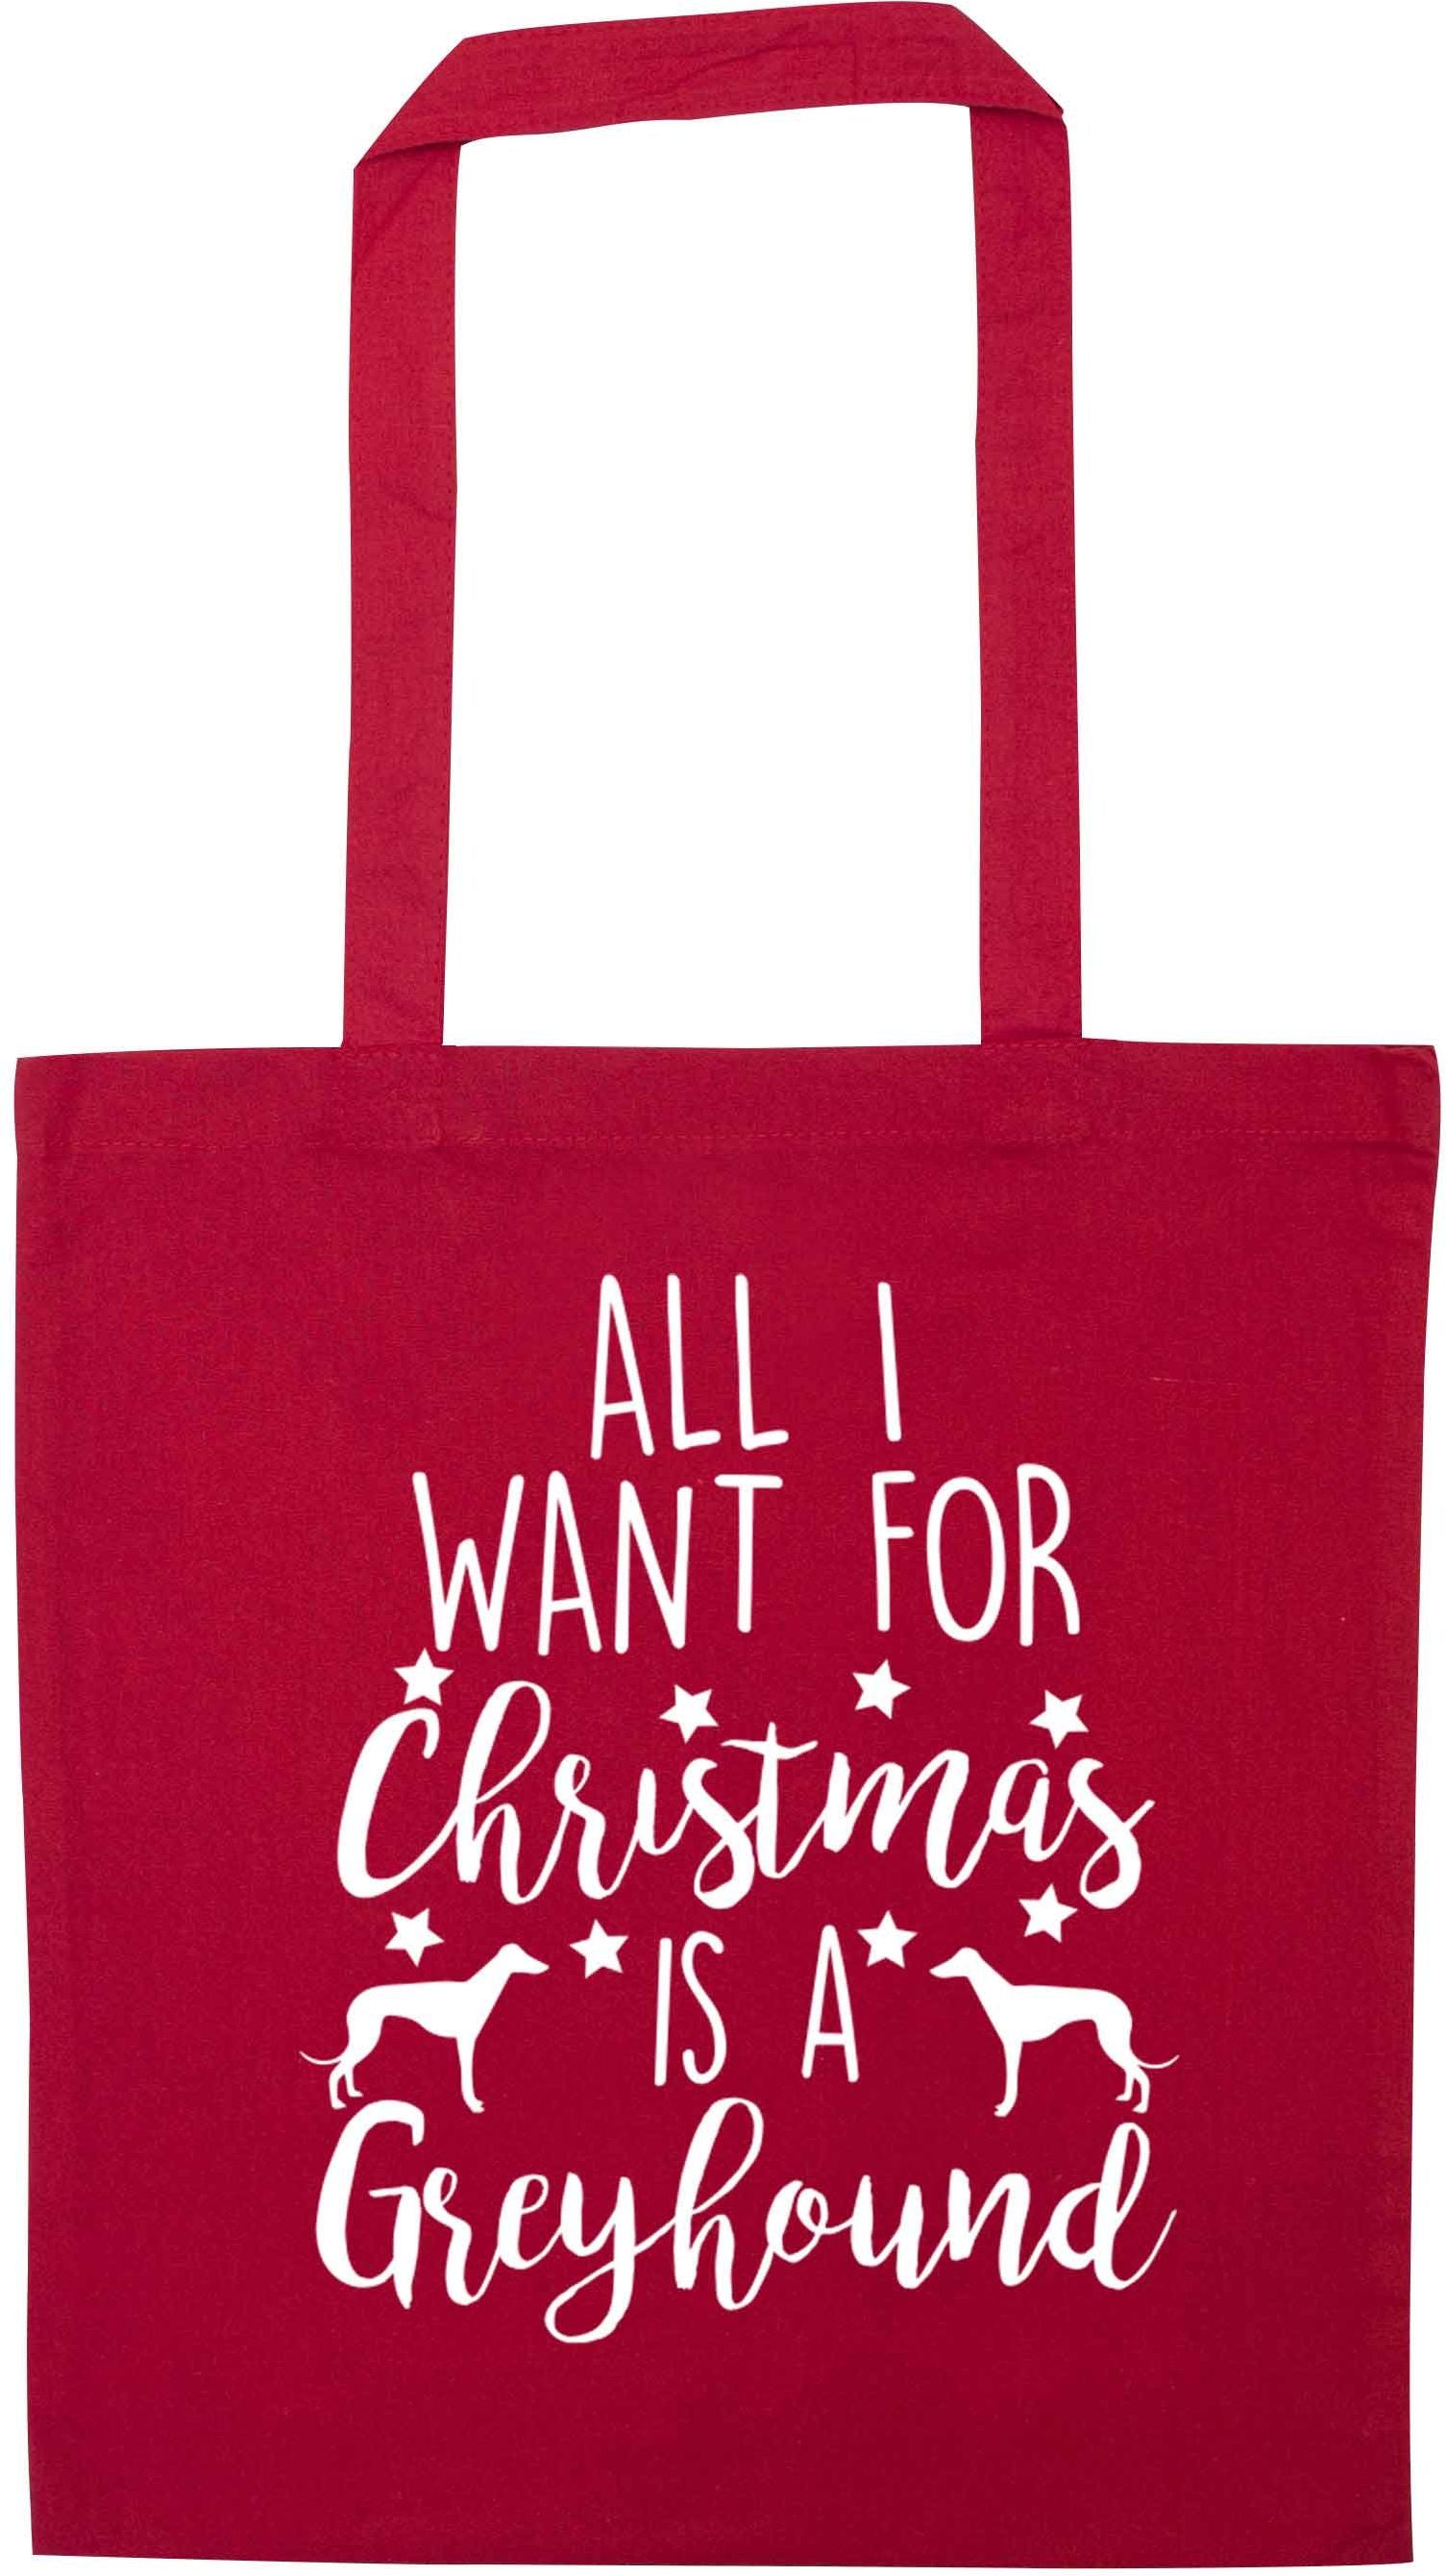 All I want for Christmas is a greyhound red tote bag